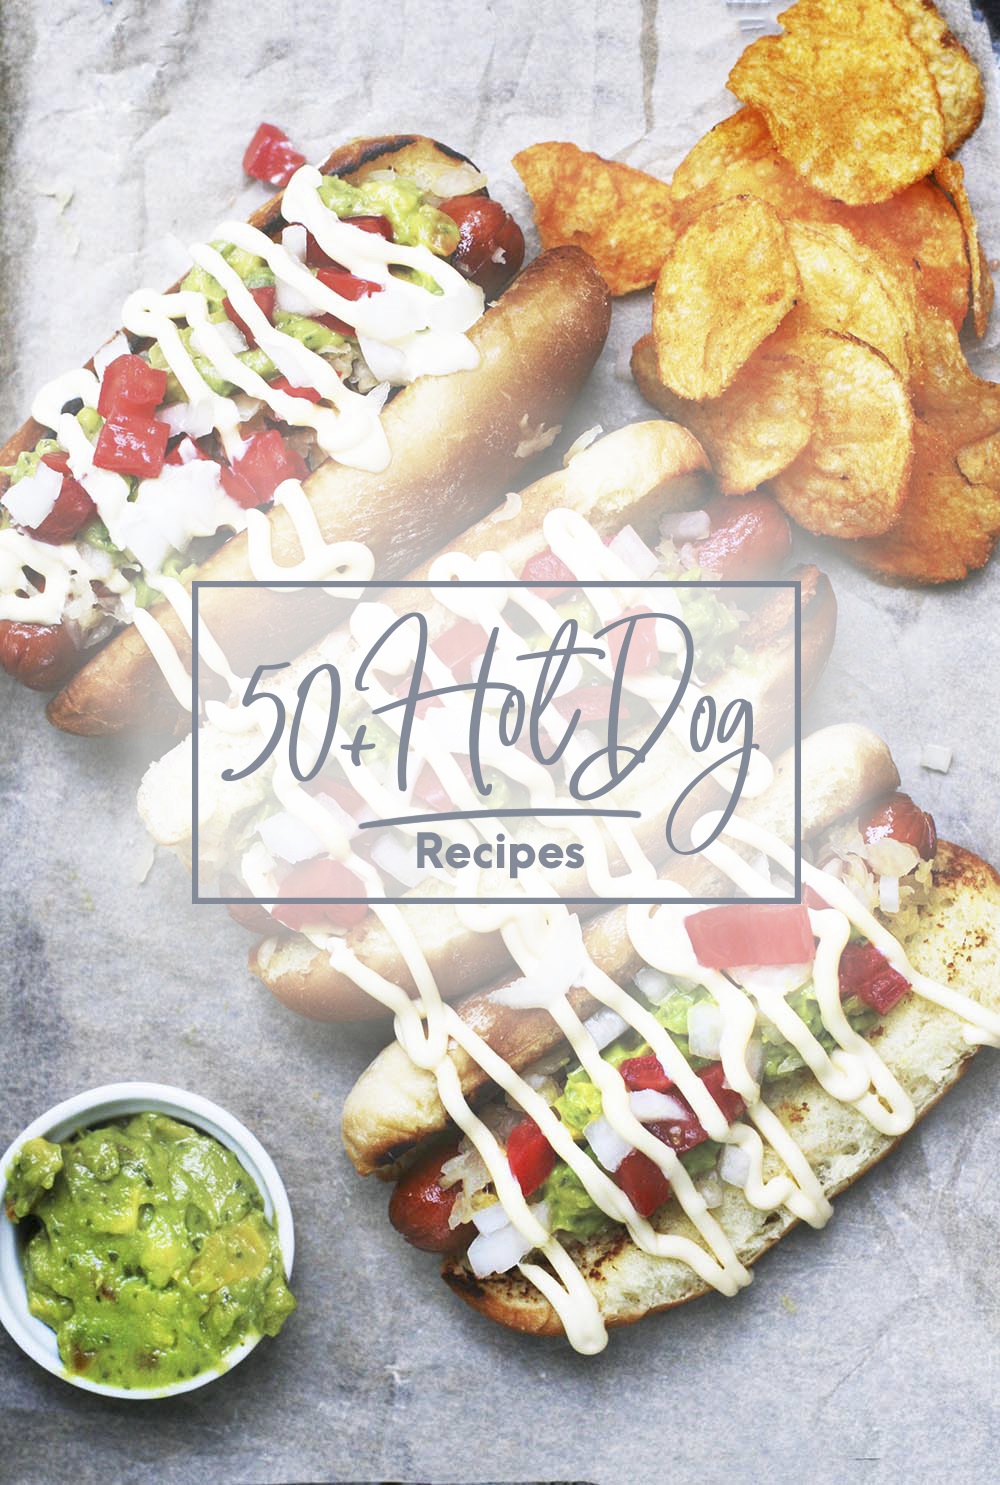 50+ hot dog recipes, plus toppings ideas and cooking methods. Your complete hot dog guide!